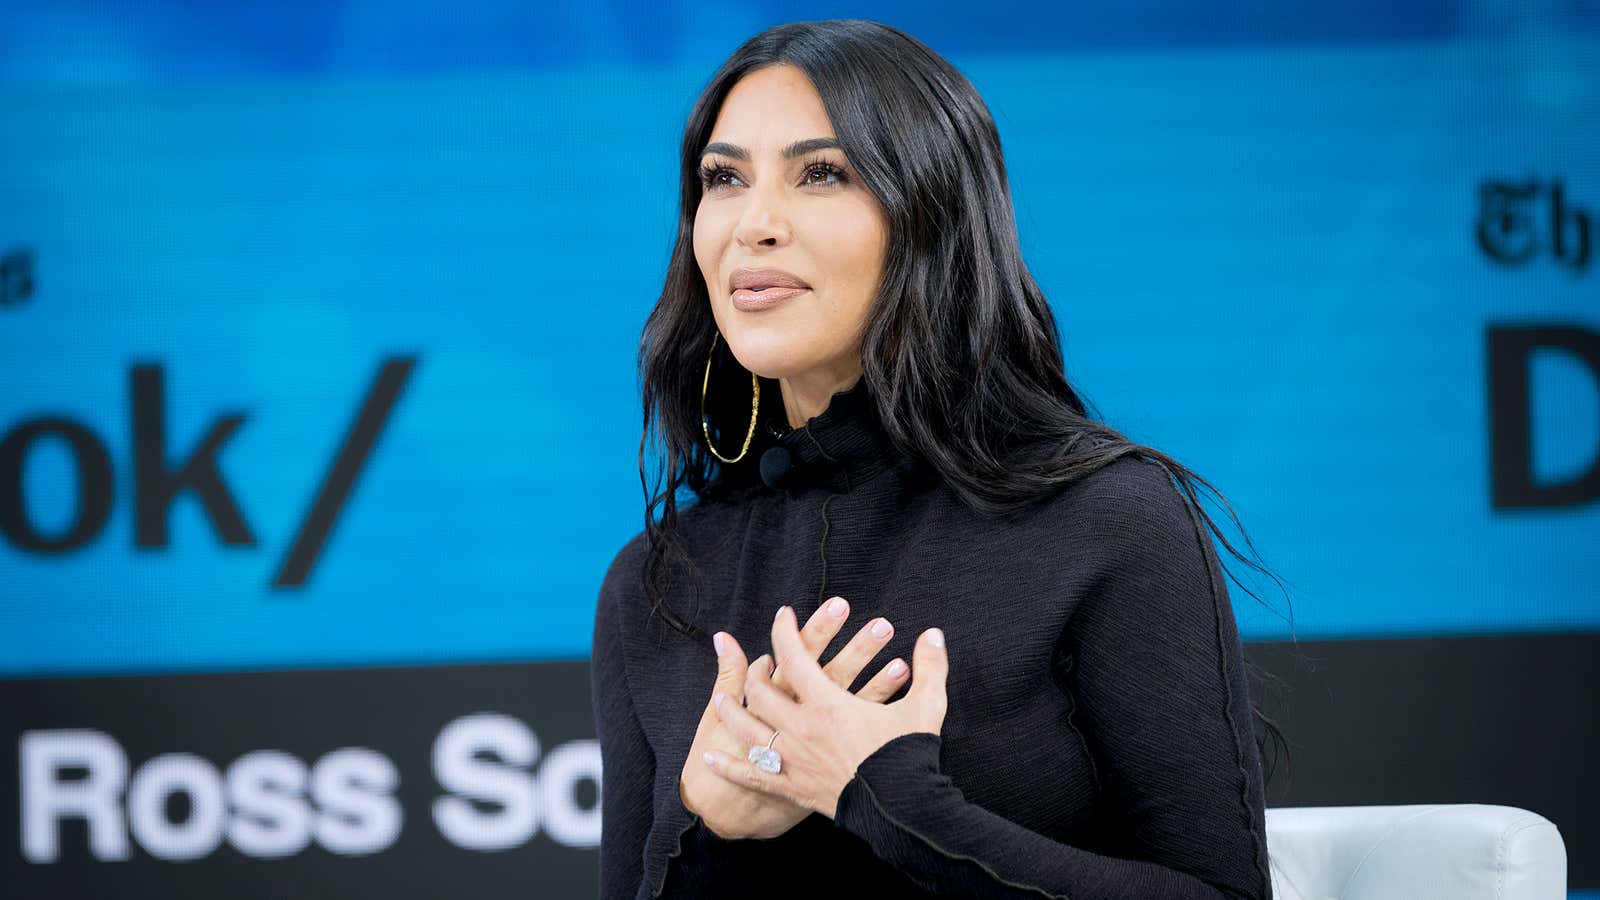 Kim Kardashian was charged for illegally hawking a cryptocurrency